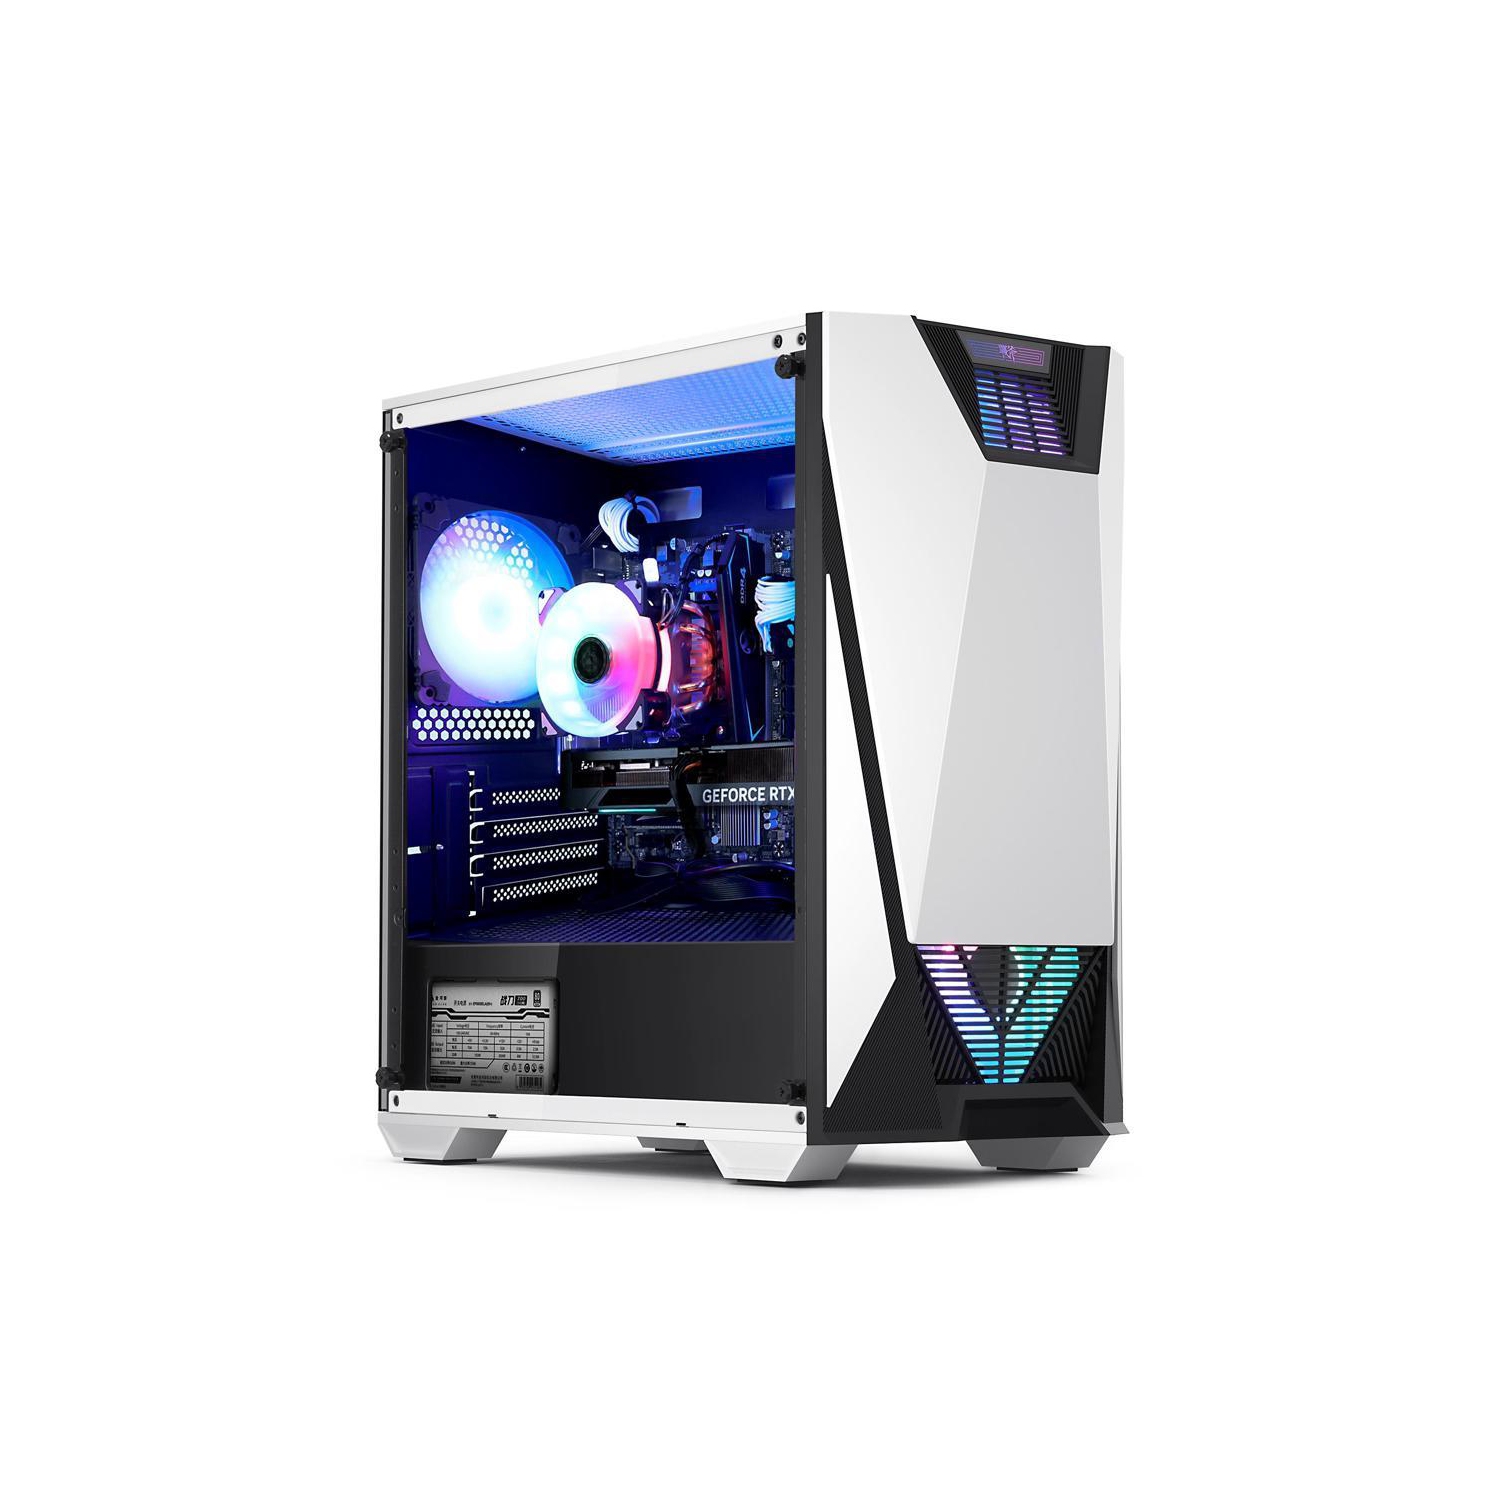 Hoengager Battleaxe Gaming - Intel Core i5-12400F 6-Core 2.5 GHz-NVIDIA GeForce RTX 3060 - 16GB DDR4 3200MHz - 2TB +500GB M.2 NVMe SSD- WIFI -RGB Fans - Windows 11 Pro Computer